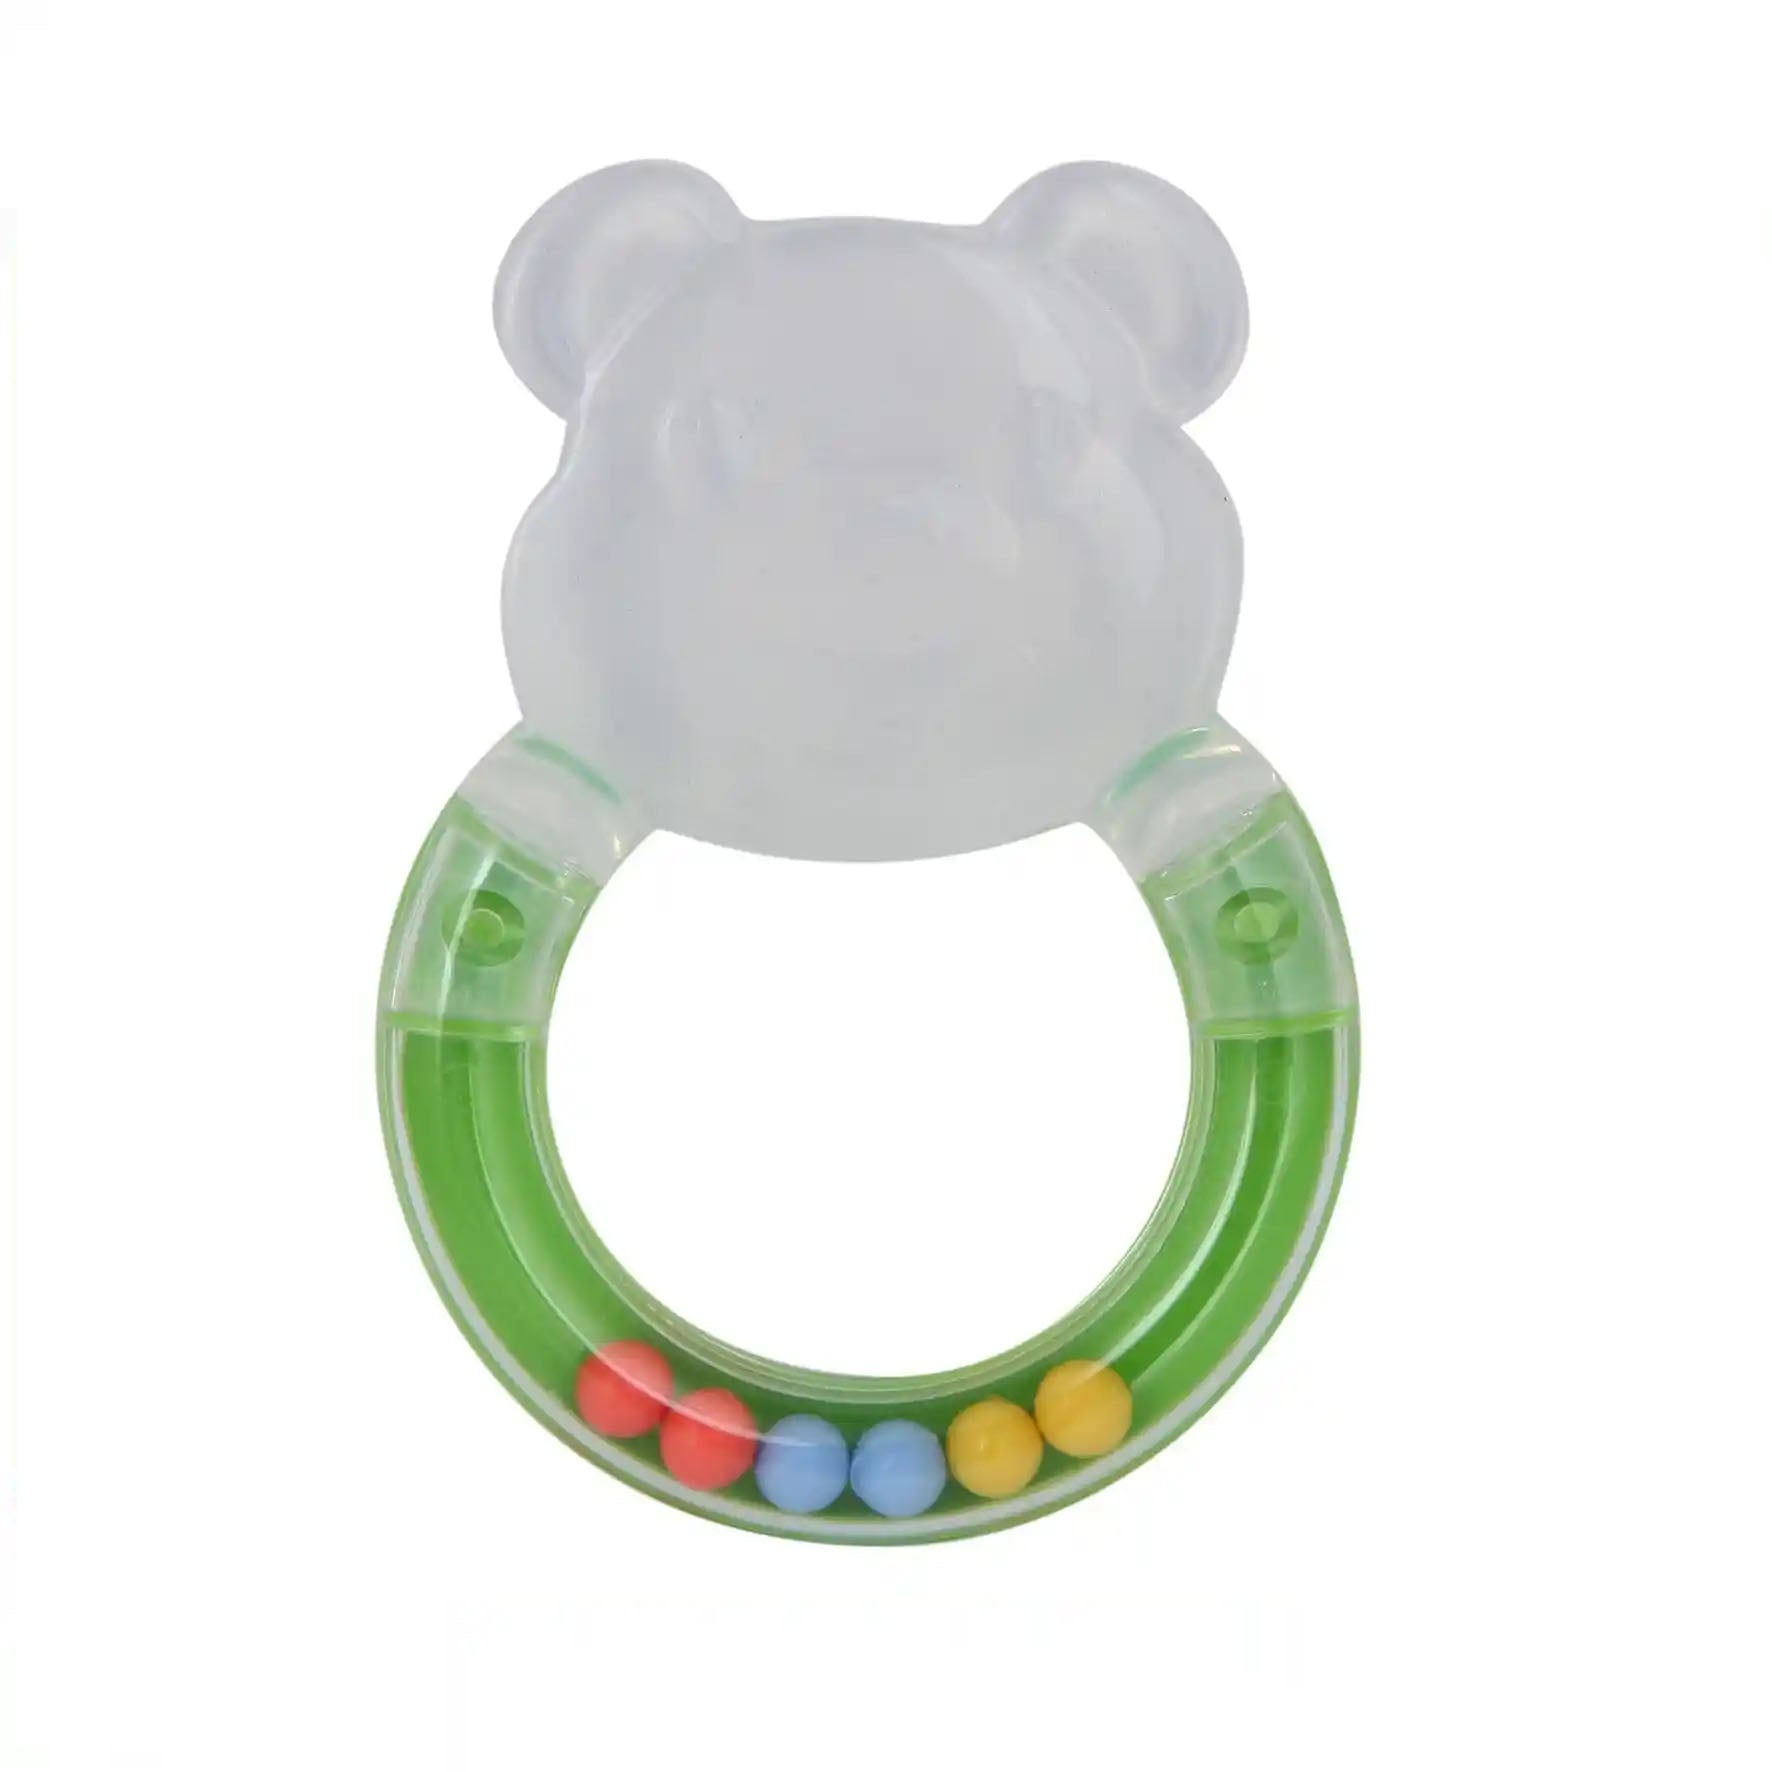 SpiderJuice 1Pc Baby Bear Teether For Babies Kids Toddlers Oral Care Training